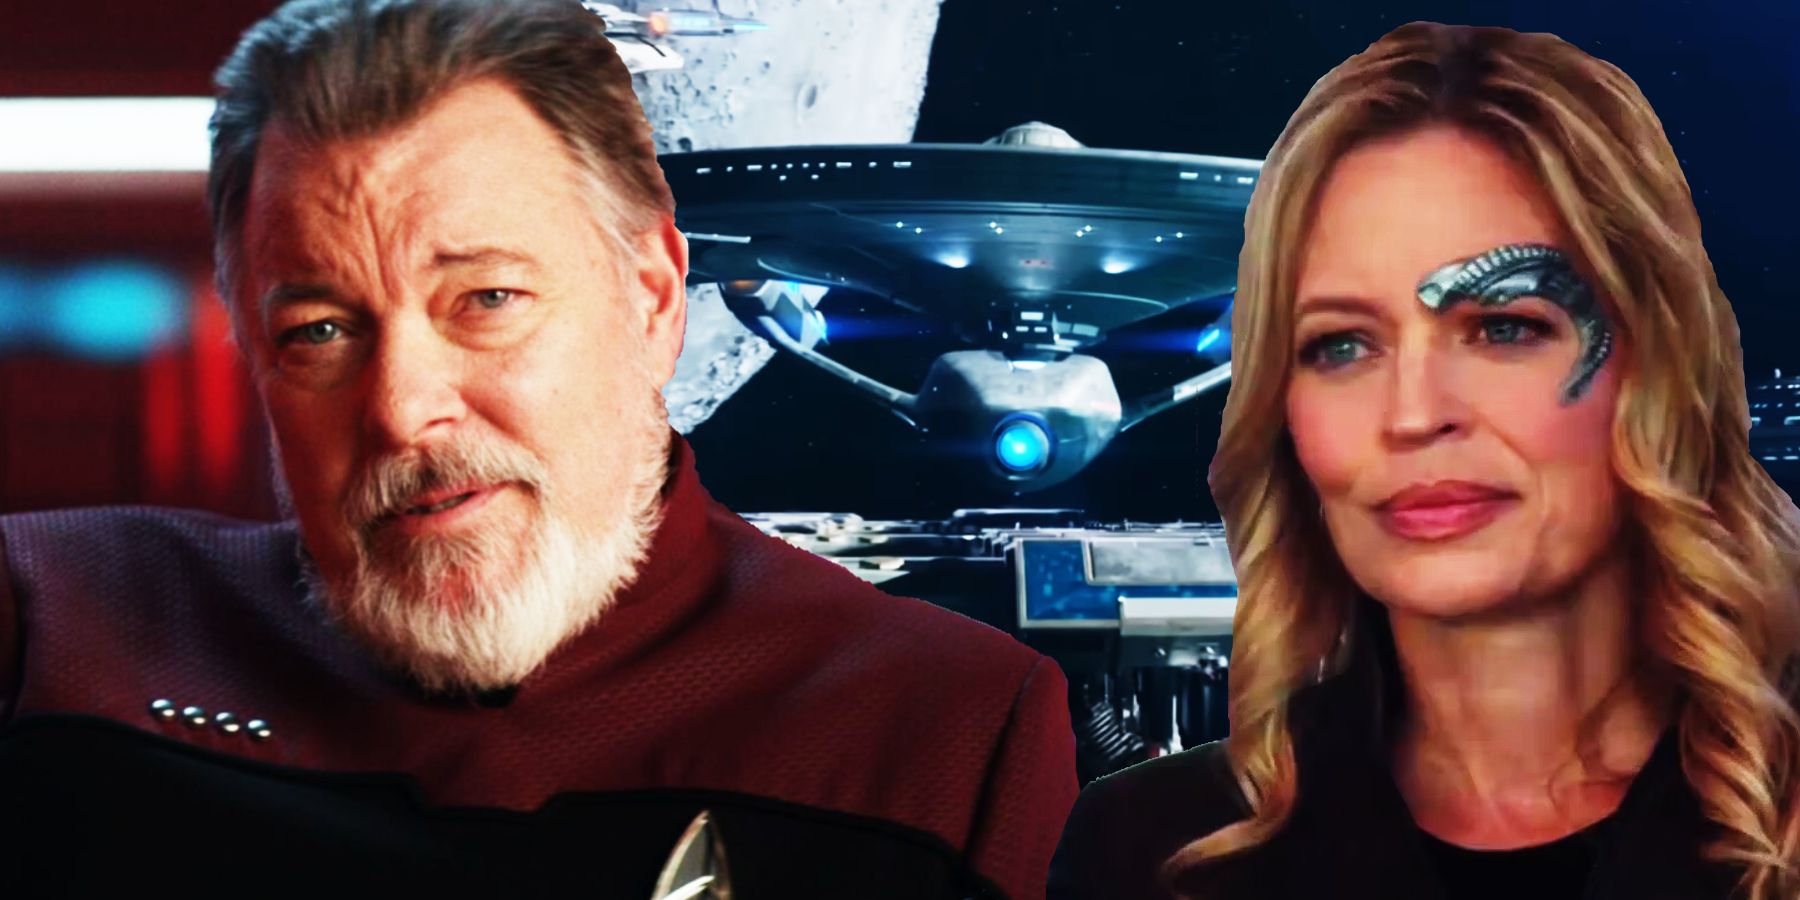 Jonathan Frakes as Will Riker and Jeri Ryan as Seven of Nine